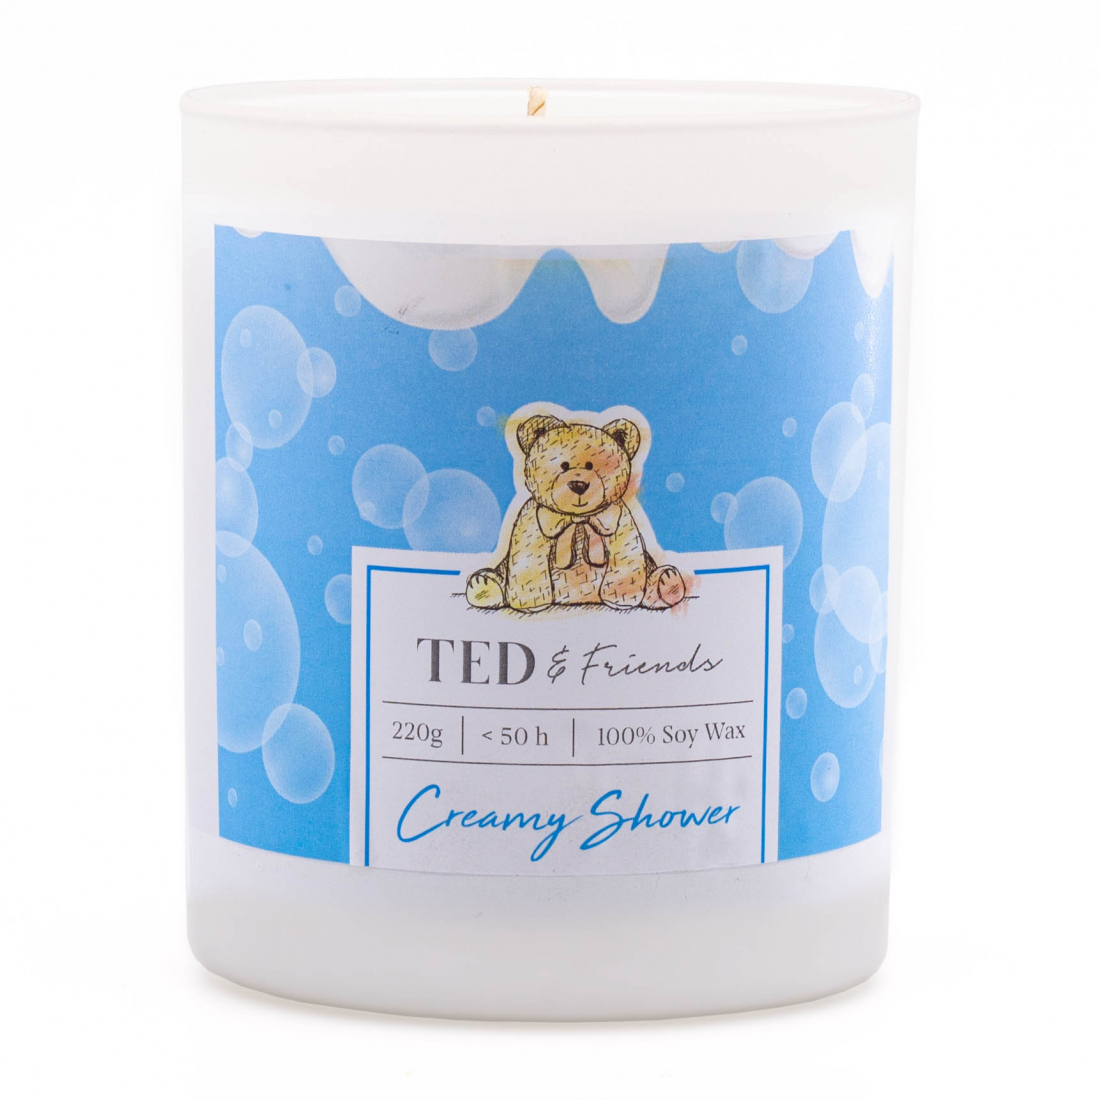 'Creamy Shower' Scented Candle - 220 g